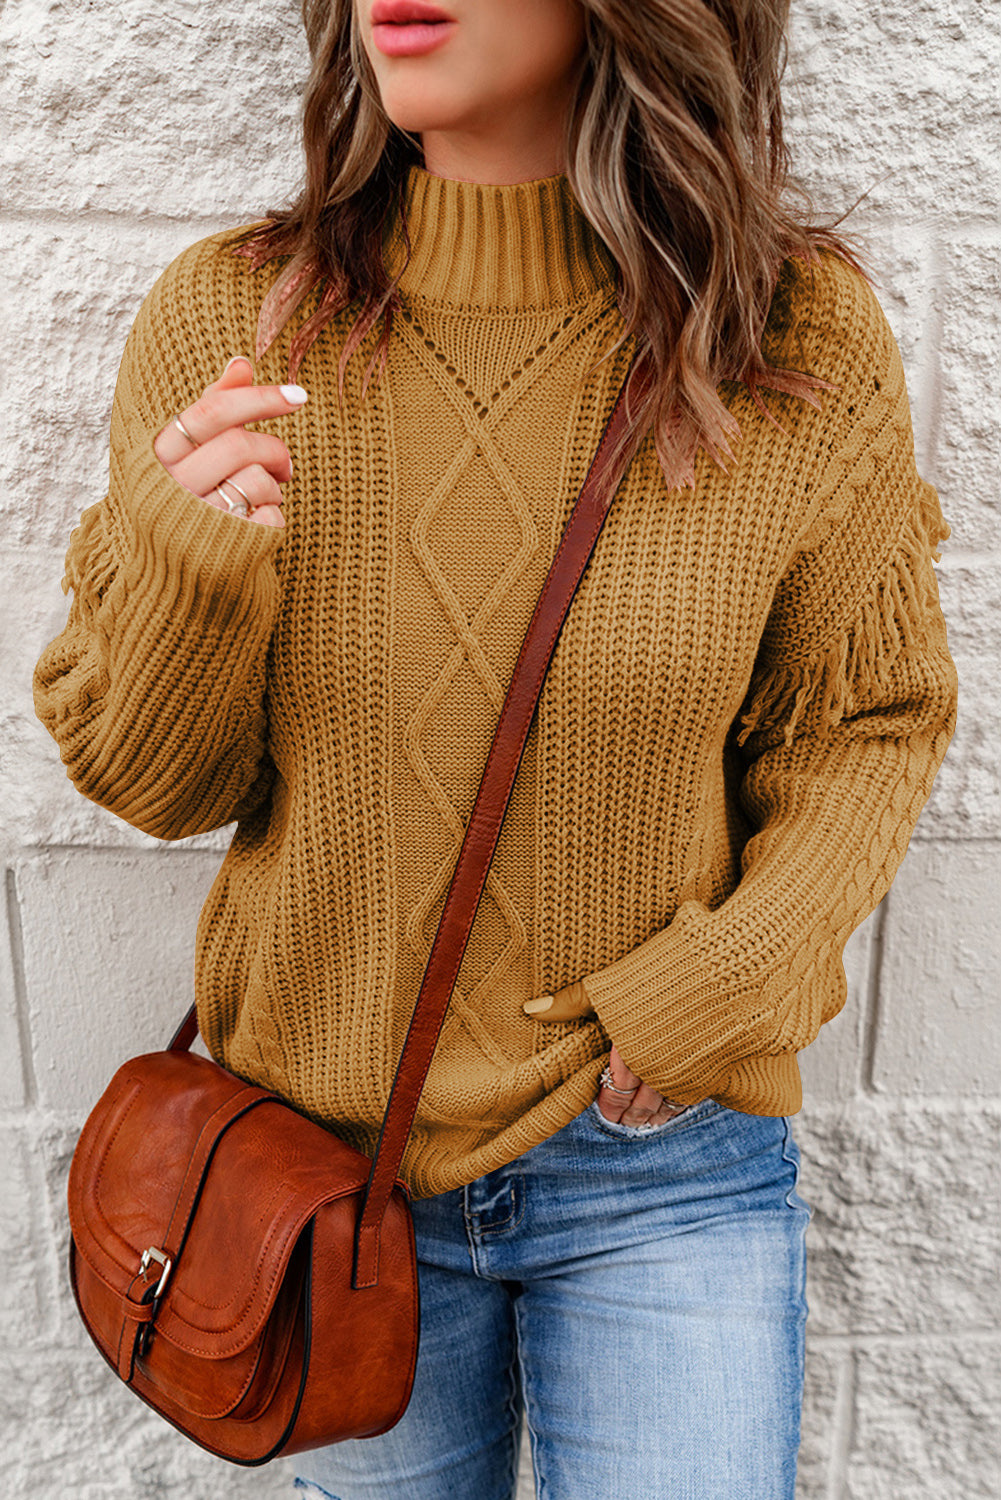 Winter Brown Mixed Textures Fringe High Neck Sweater